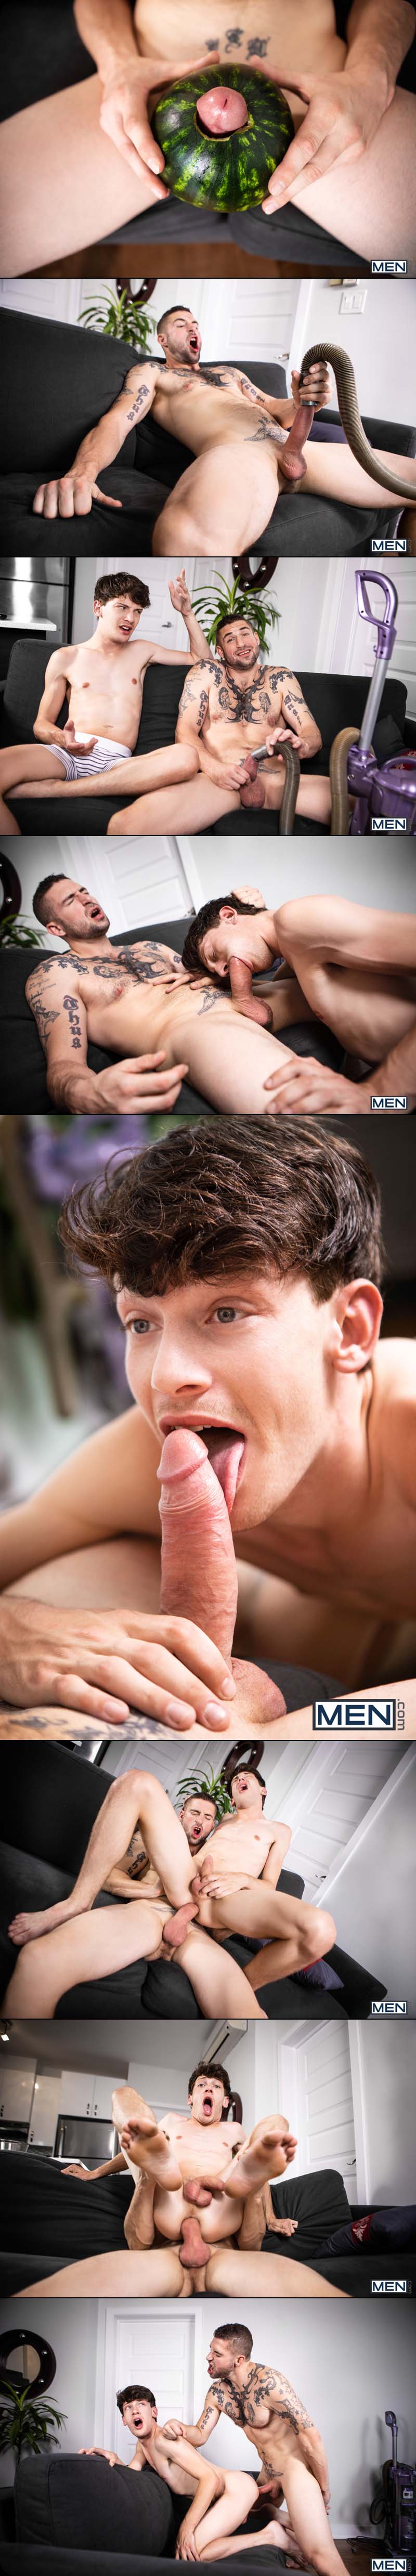 2010s Gay Porn Blow - MEN: Edward Terrant Cums In Watermelon After Riding Derek Thibault's Cock  in 'Just What He Needs' - WAYBIG